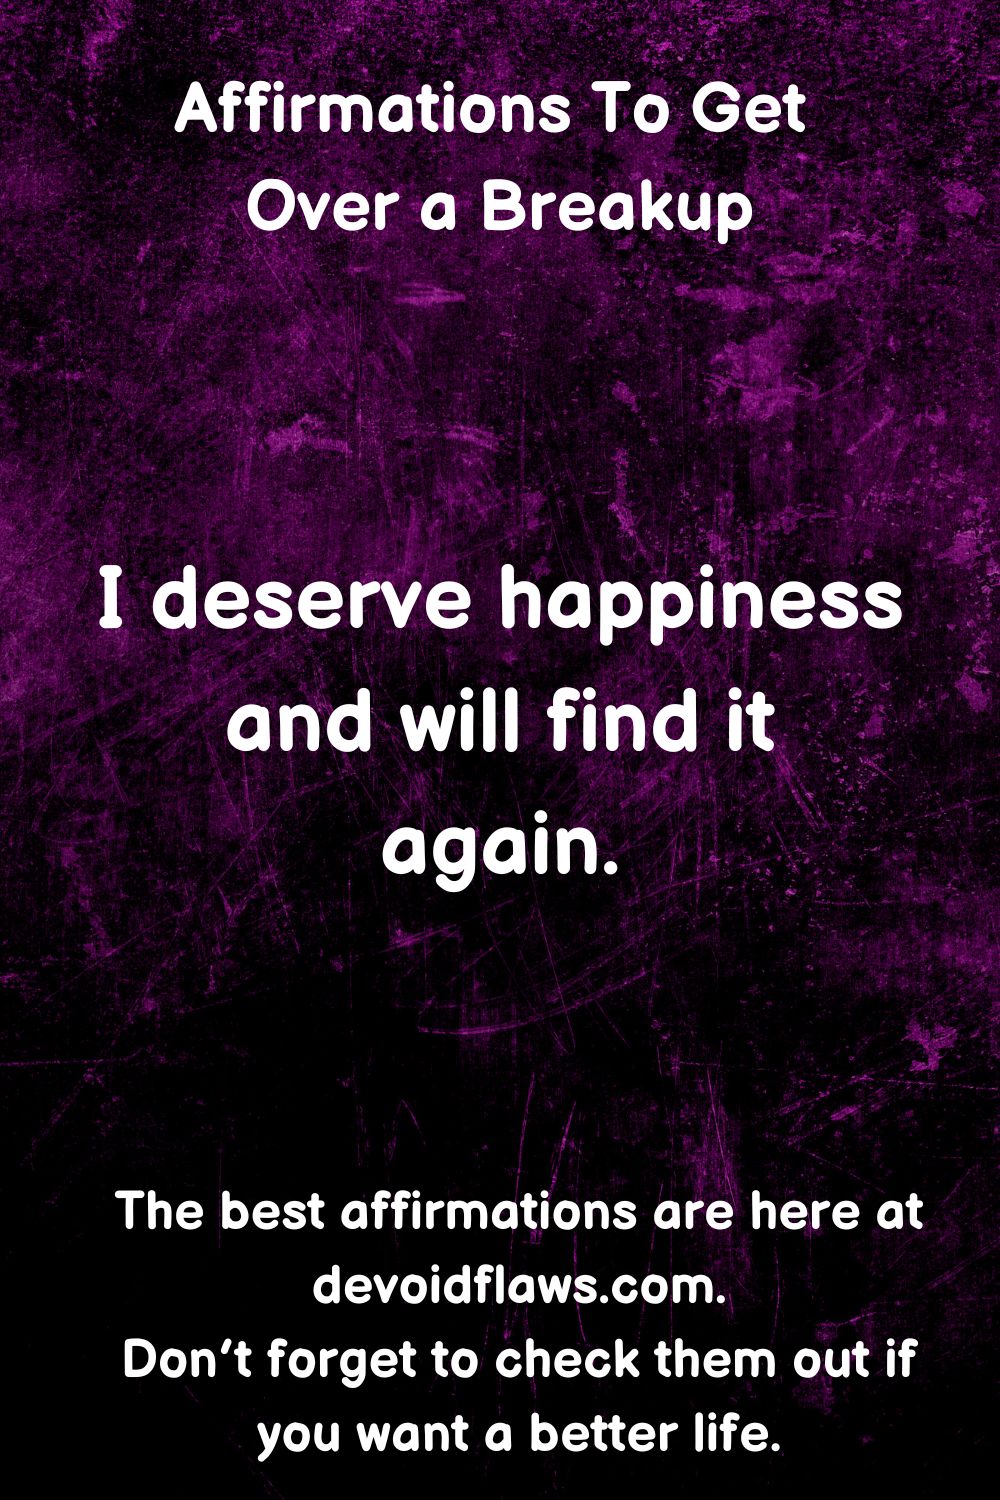 50 Positive Affirmations To Get Over a Breakup